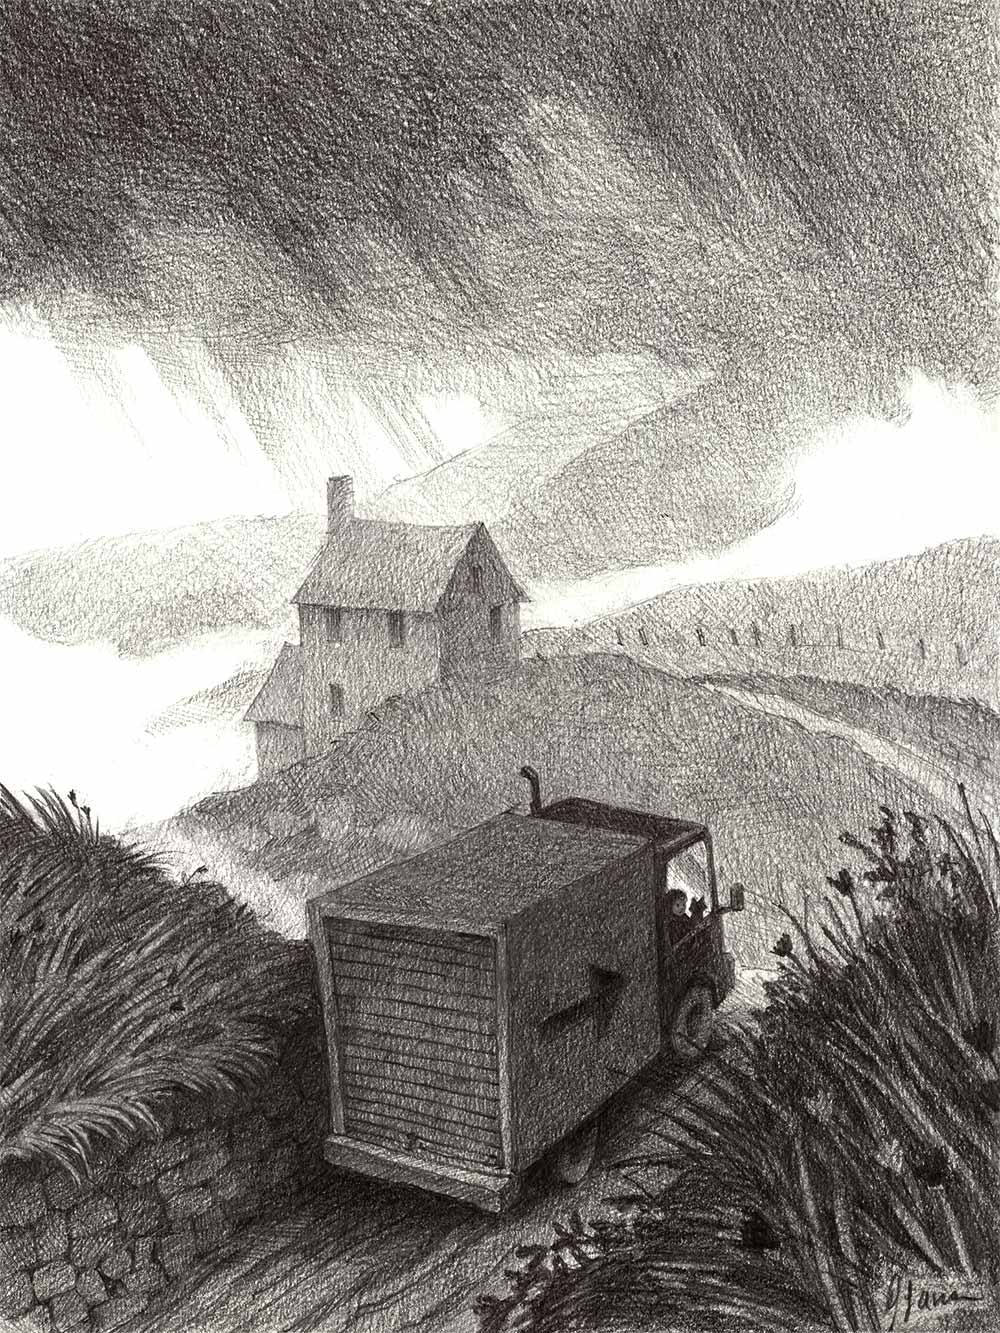 Moving Day - Pencil drawing by Jessica Lanan of a truck driving down a dirt road toward a solitary house beneath a rainy sky.